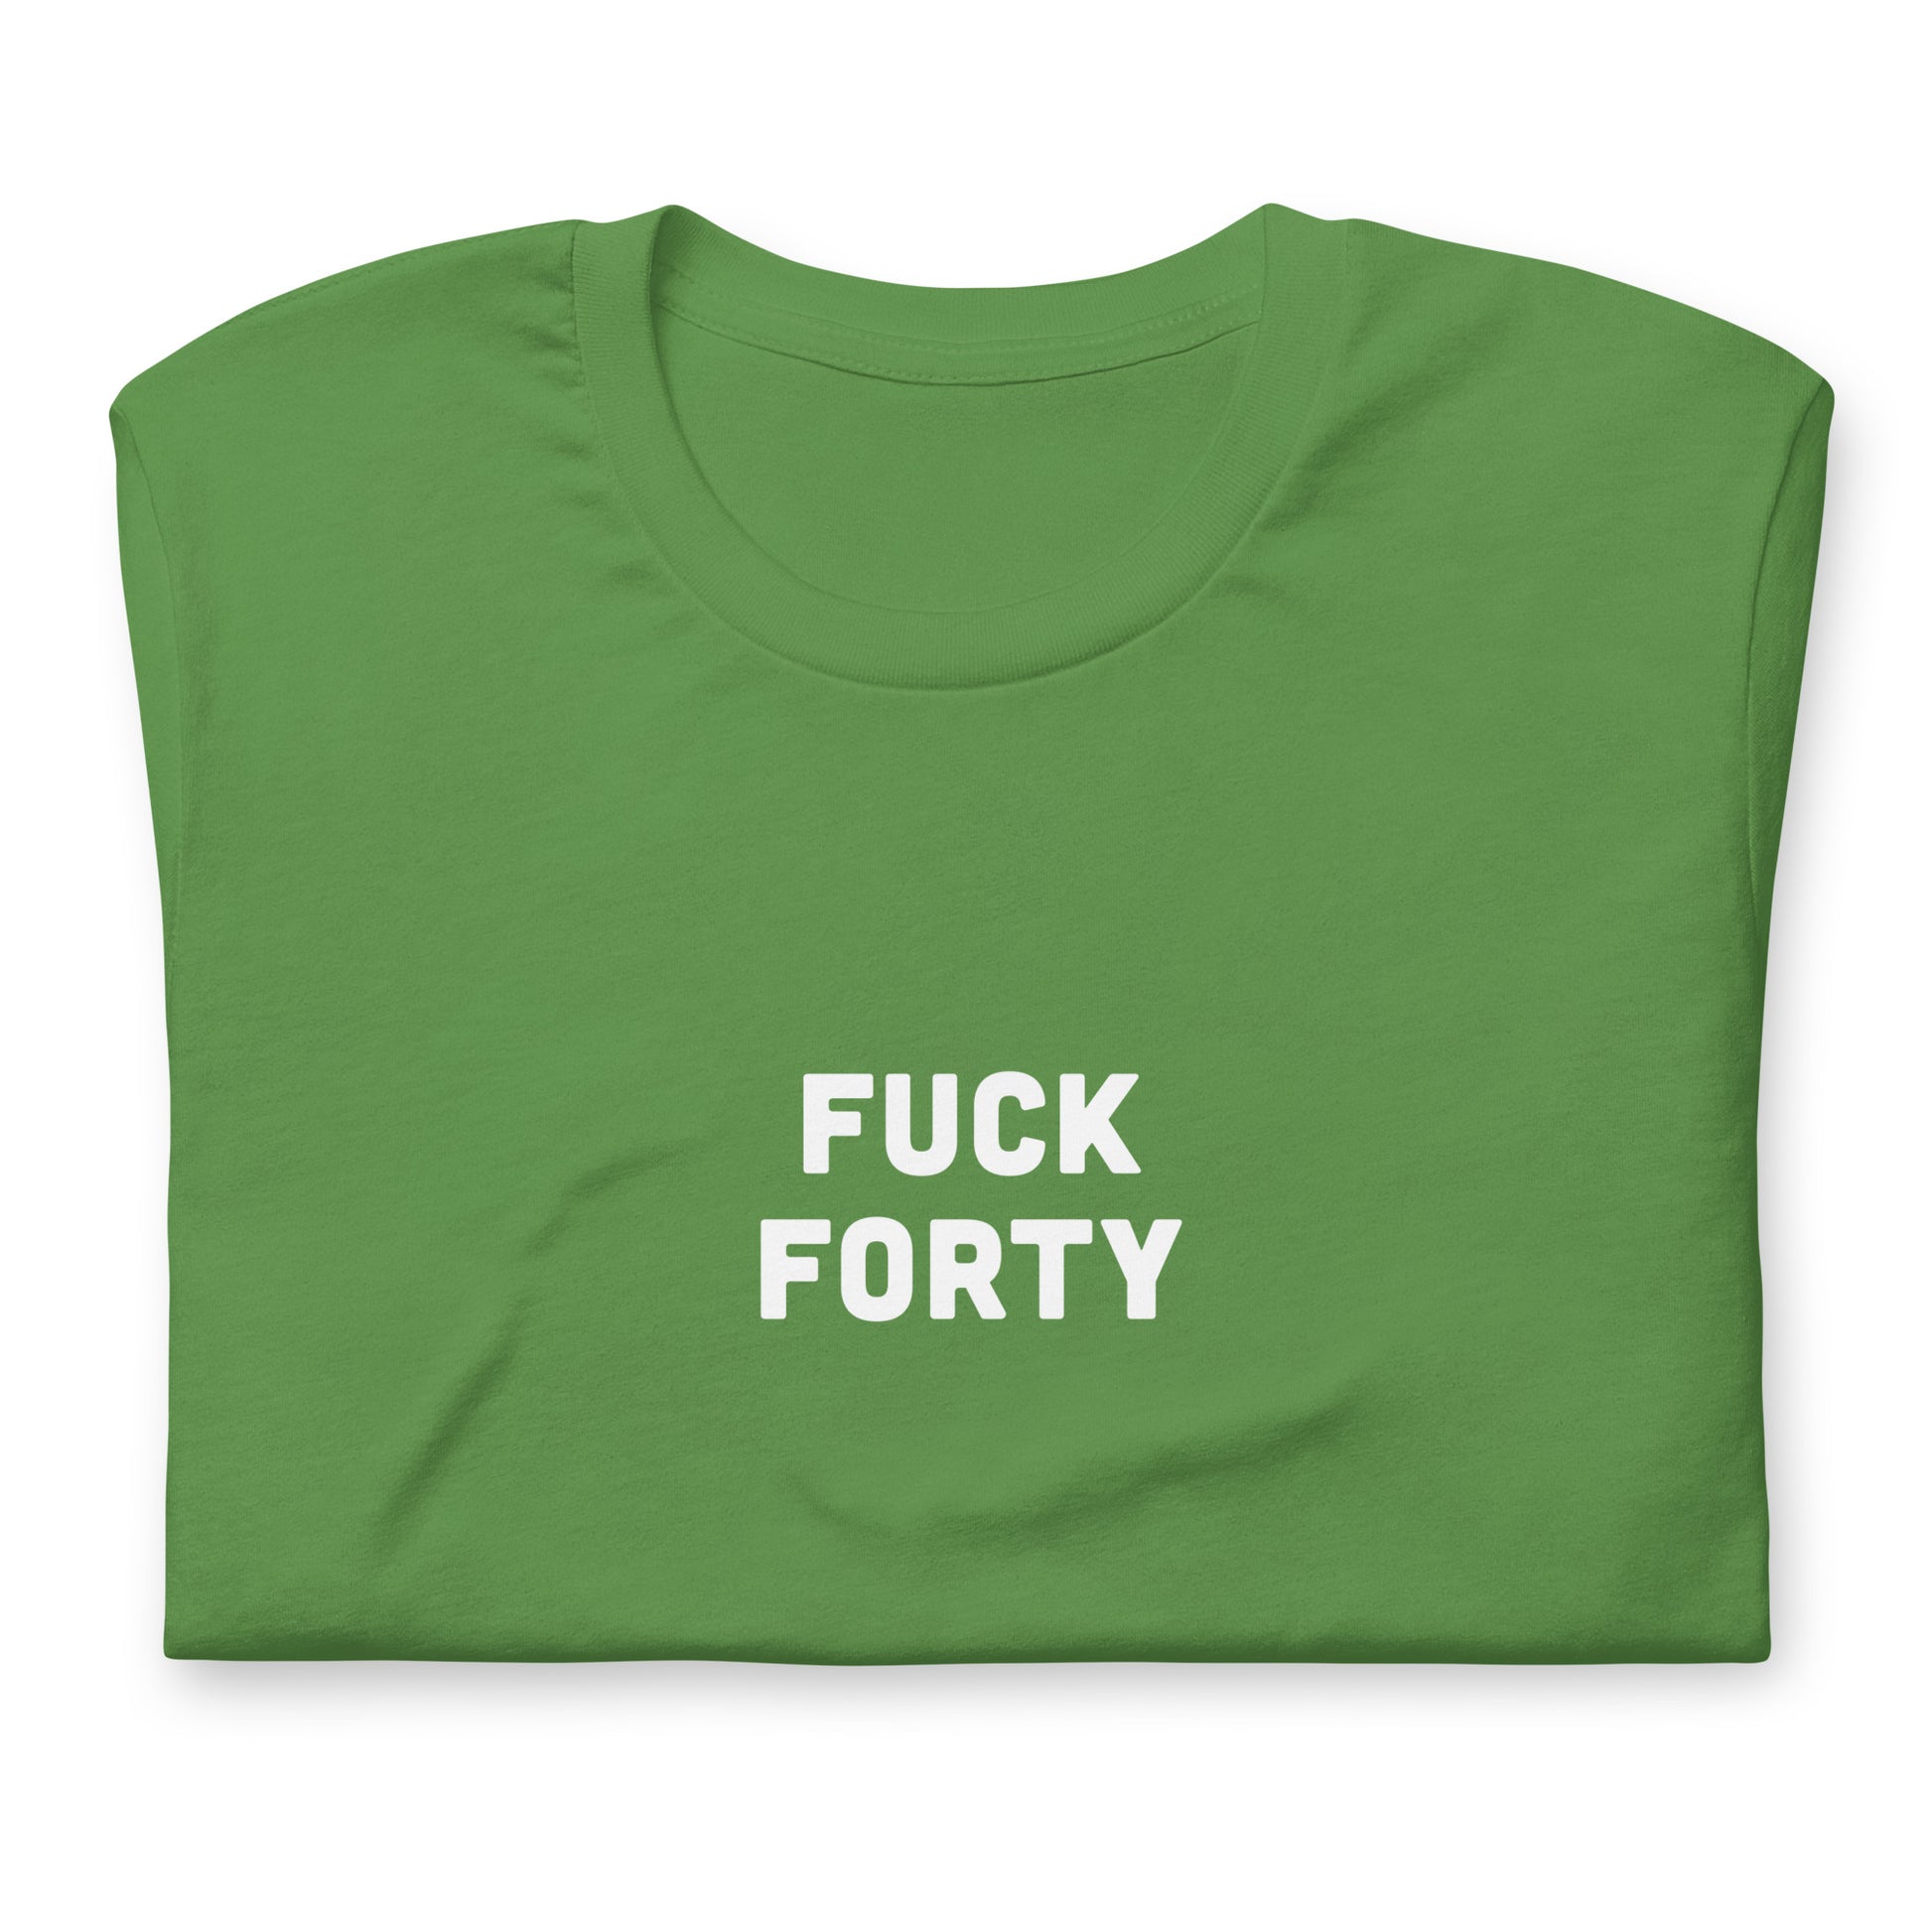 Fuck 40 T-Shirt Size S Color Forest